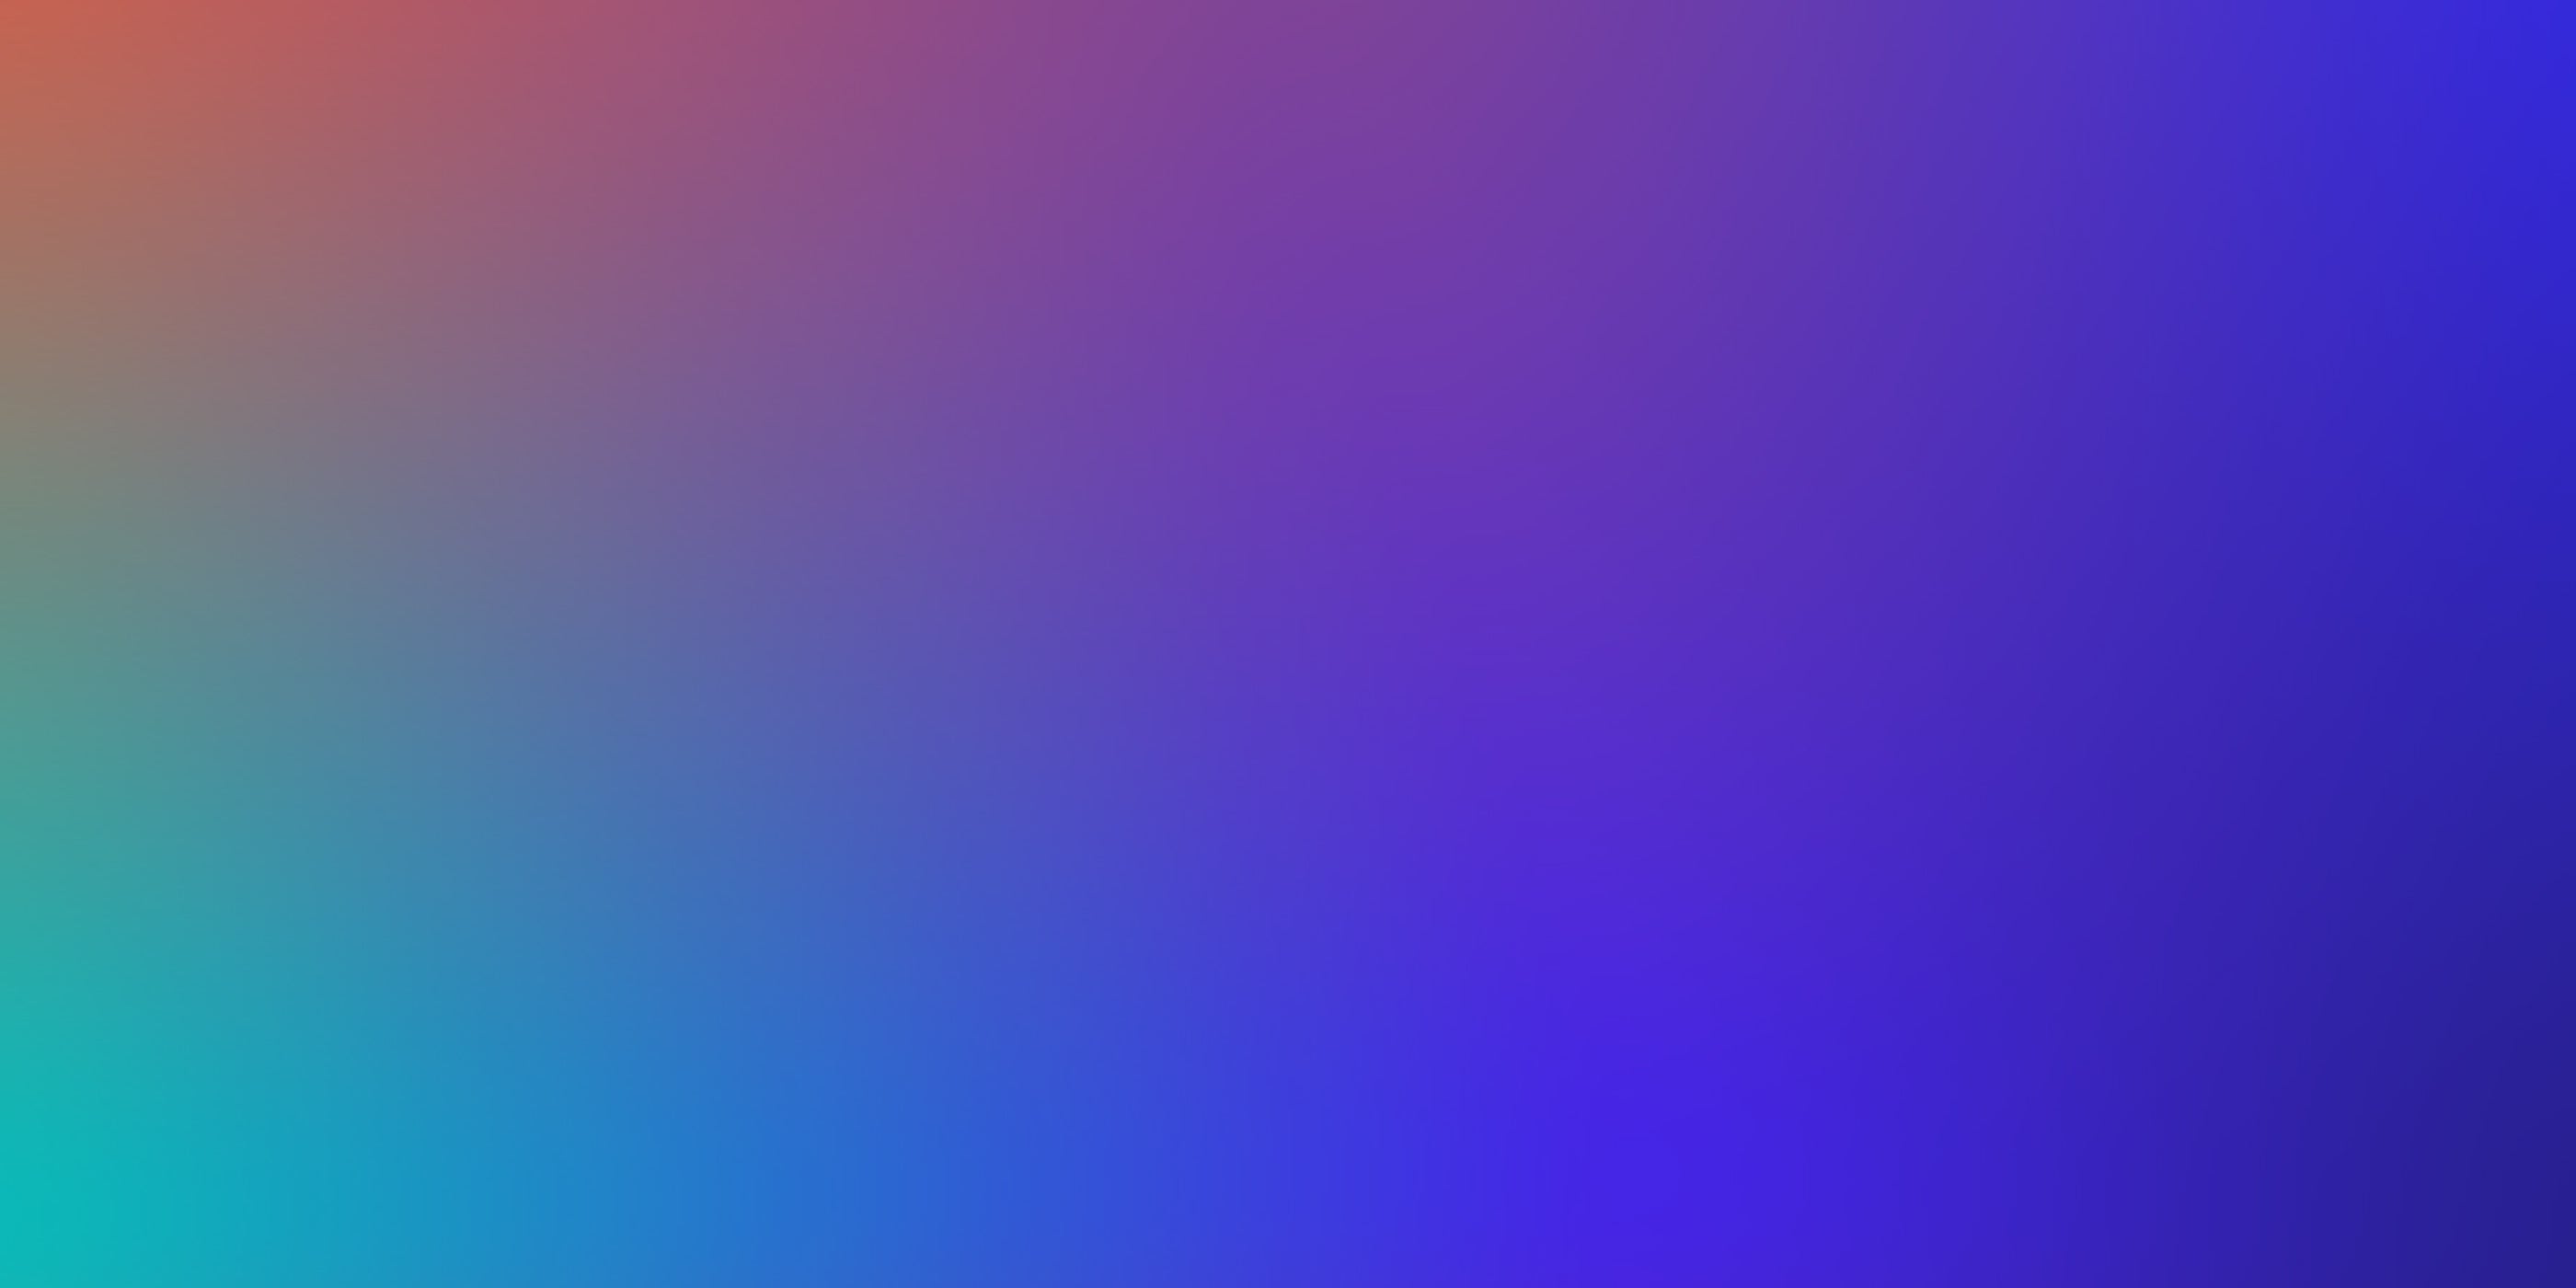 gradiant background with blues, purples, teals, yellows, and pinks